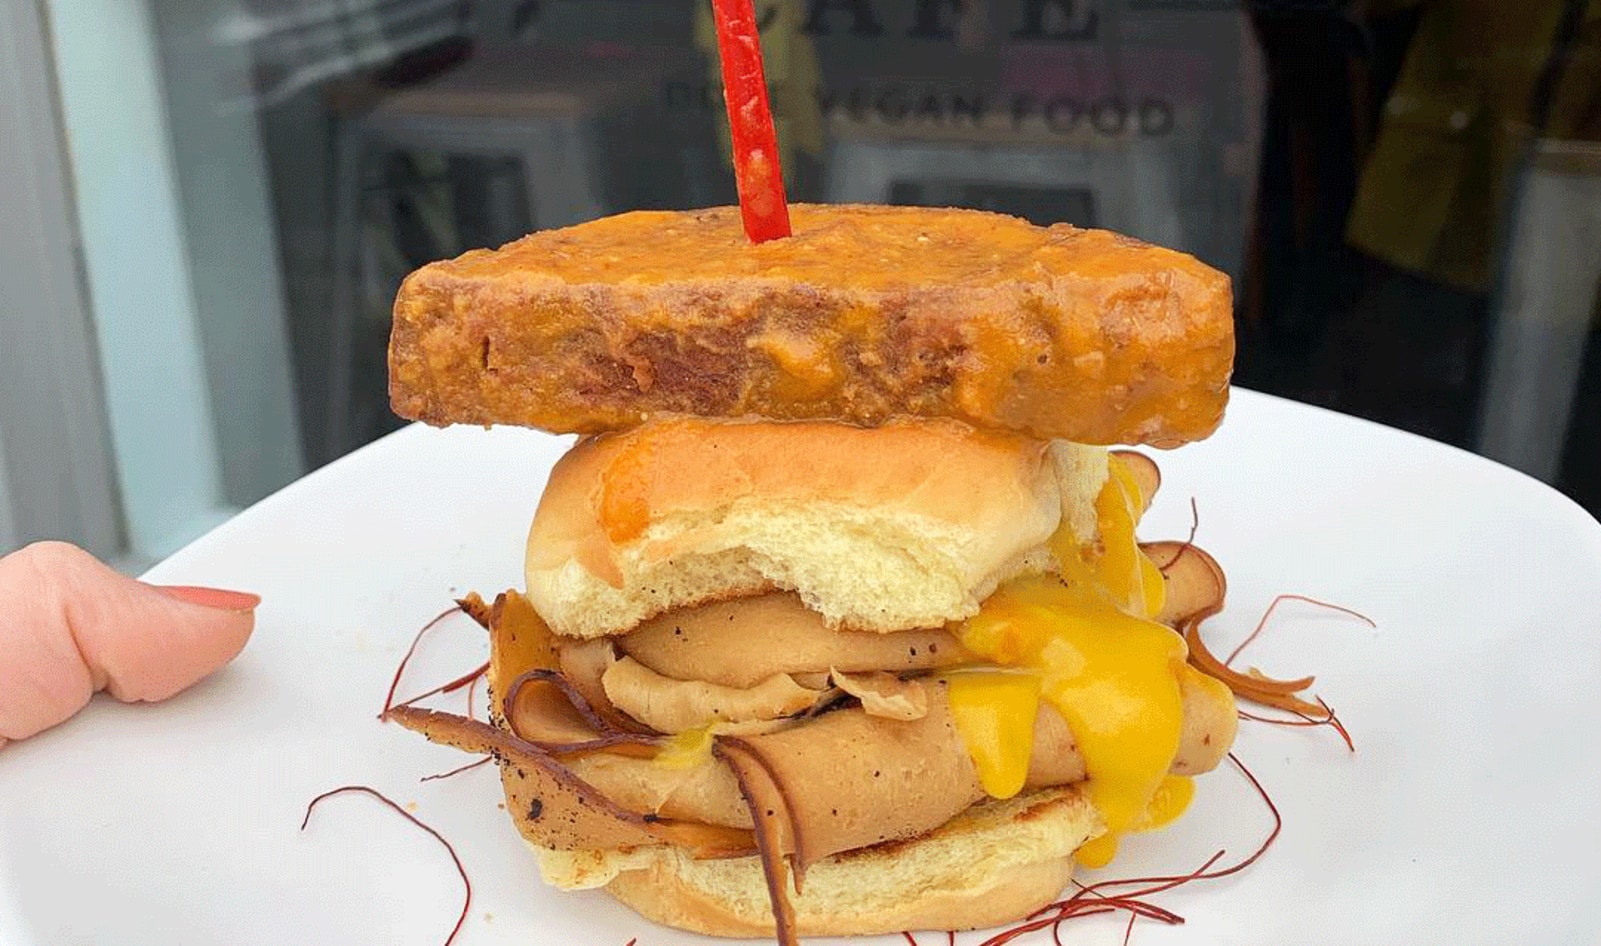 Kentucky Café Dares You to Survive Its Face-Melting Spicy Vegan Sandwich Challenge